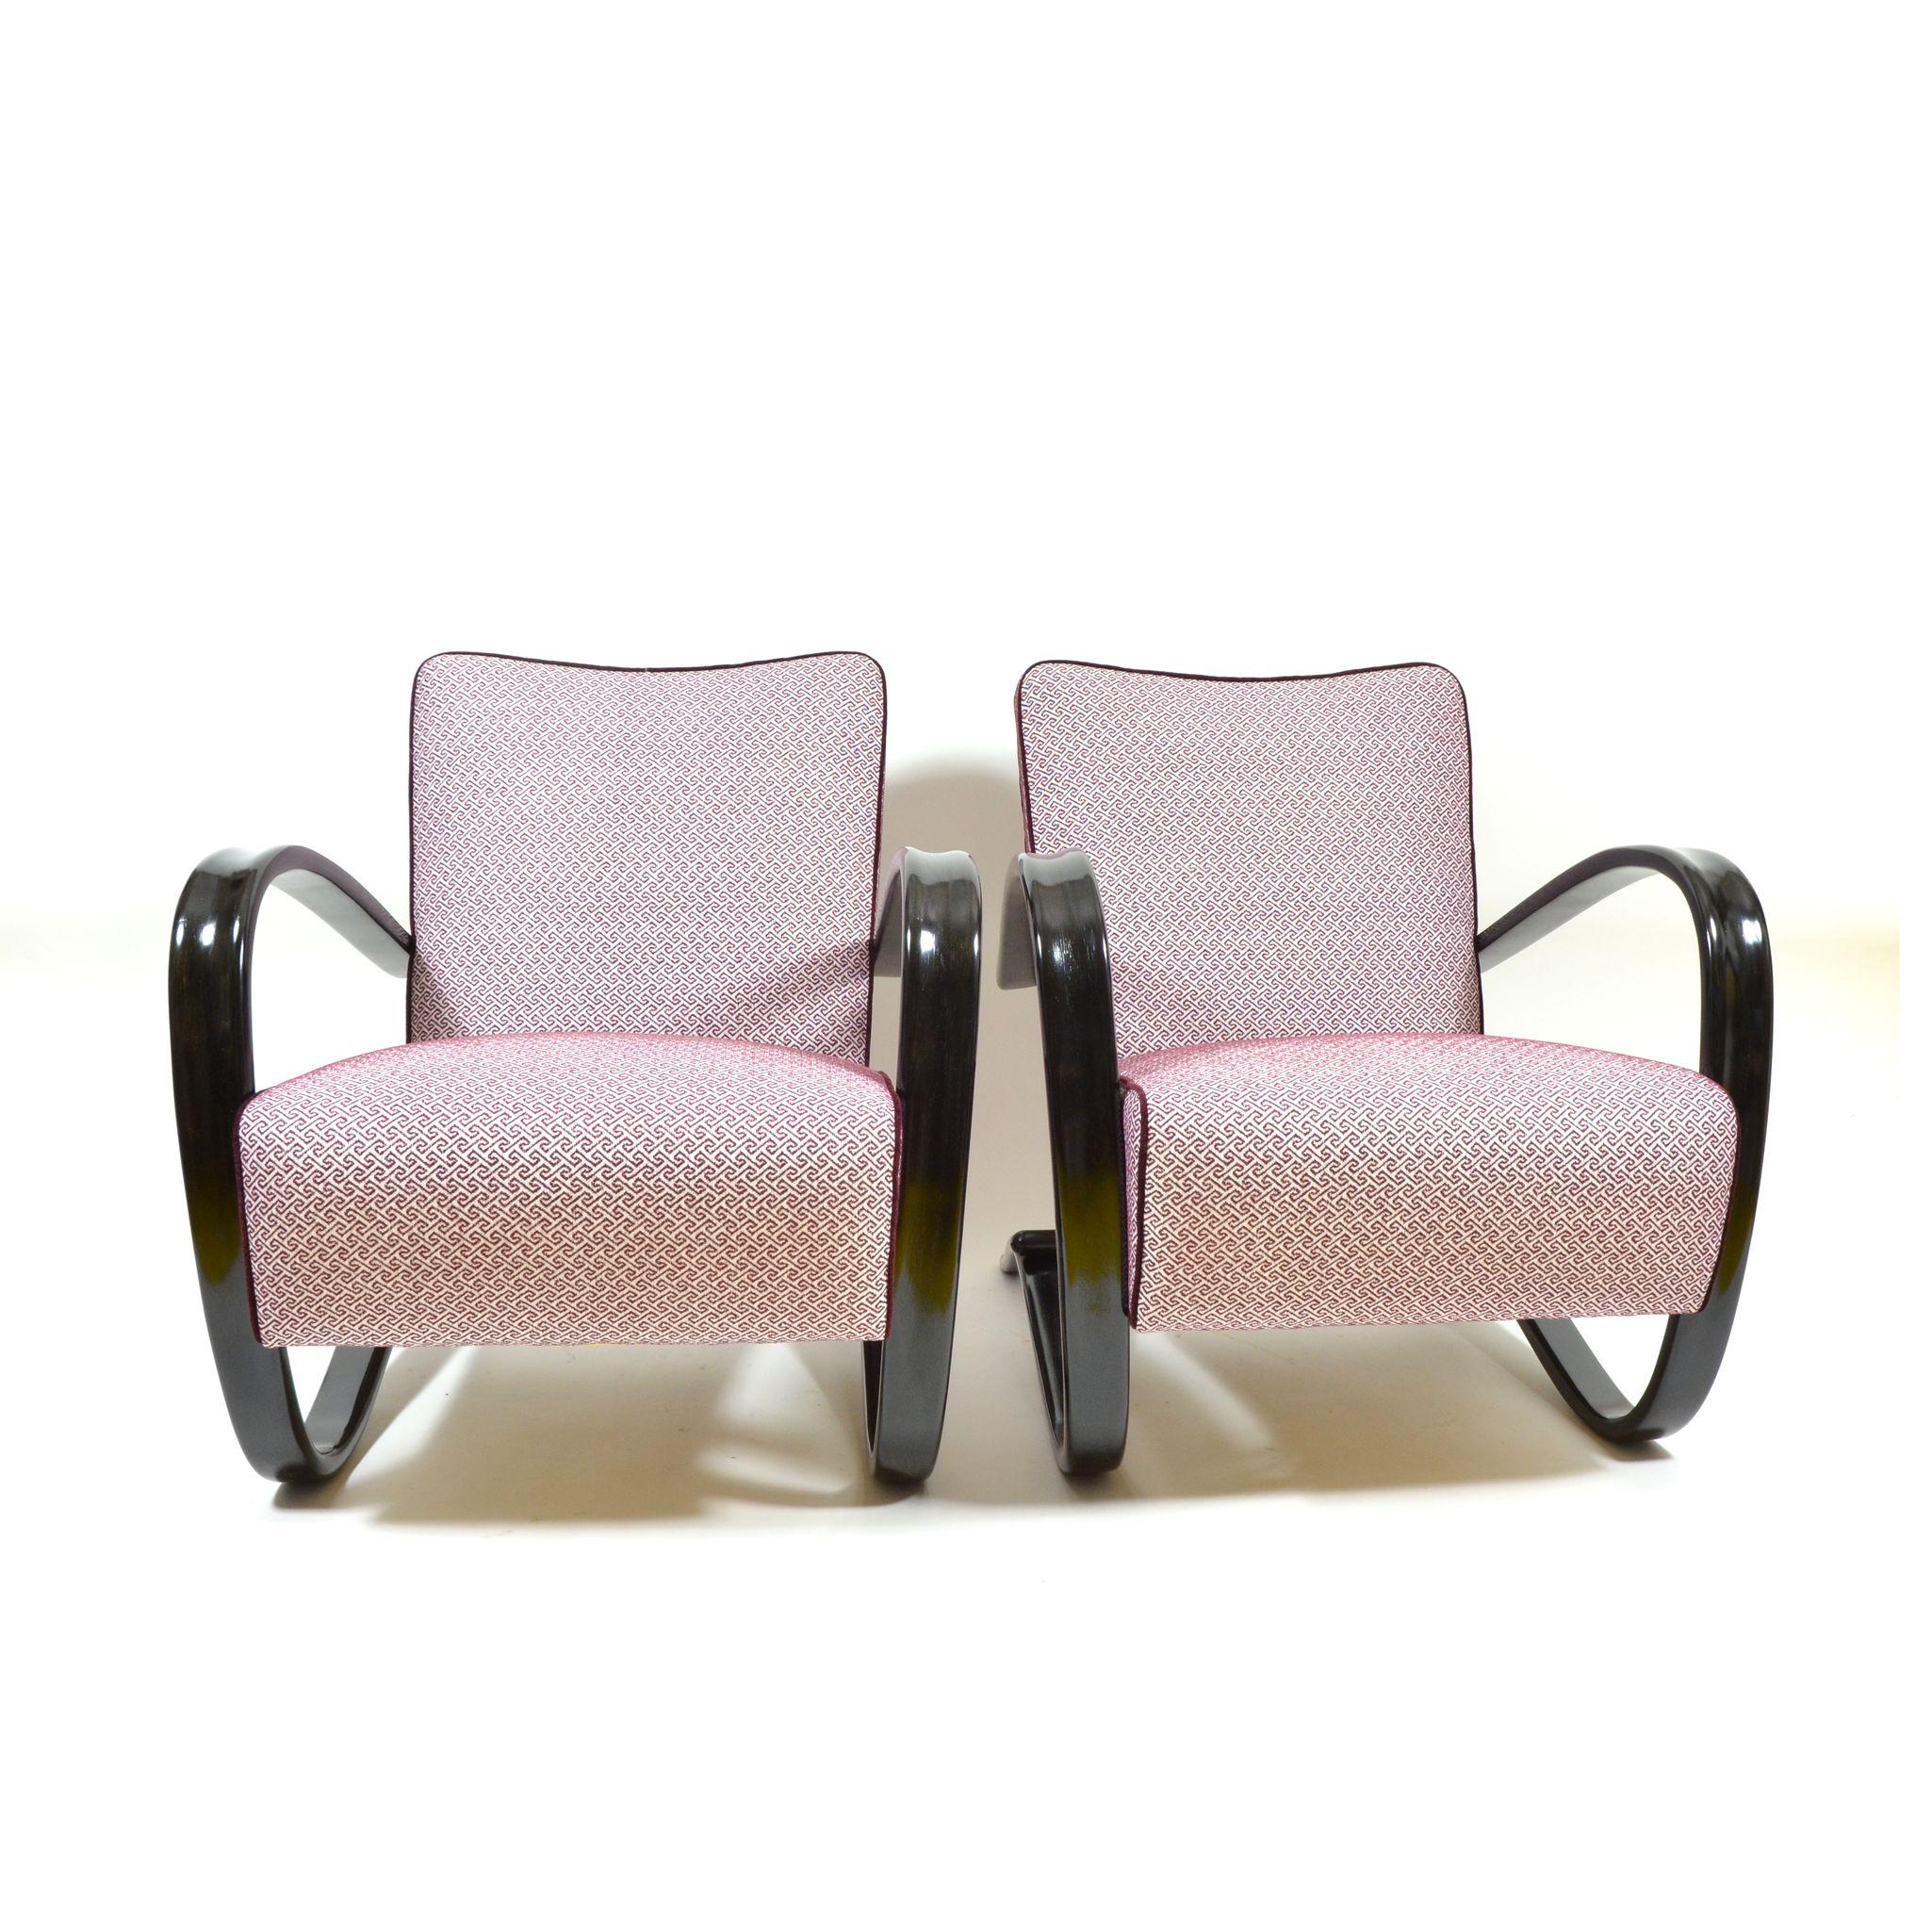 Czech Art Deco H-269 Armchairs by Jindrich Halabala for Thonet, 1930s, Set of 2 For Sale